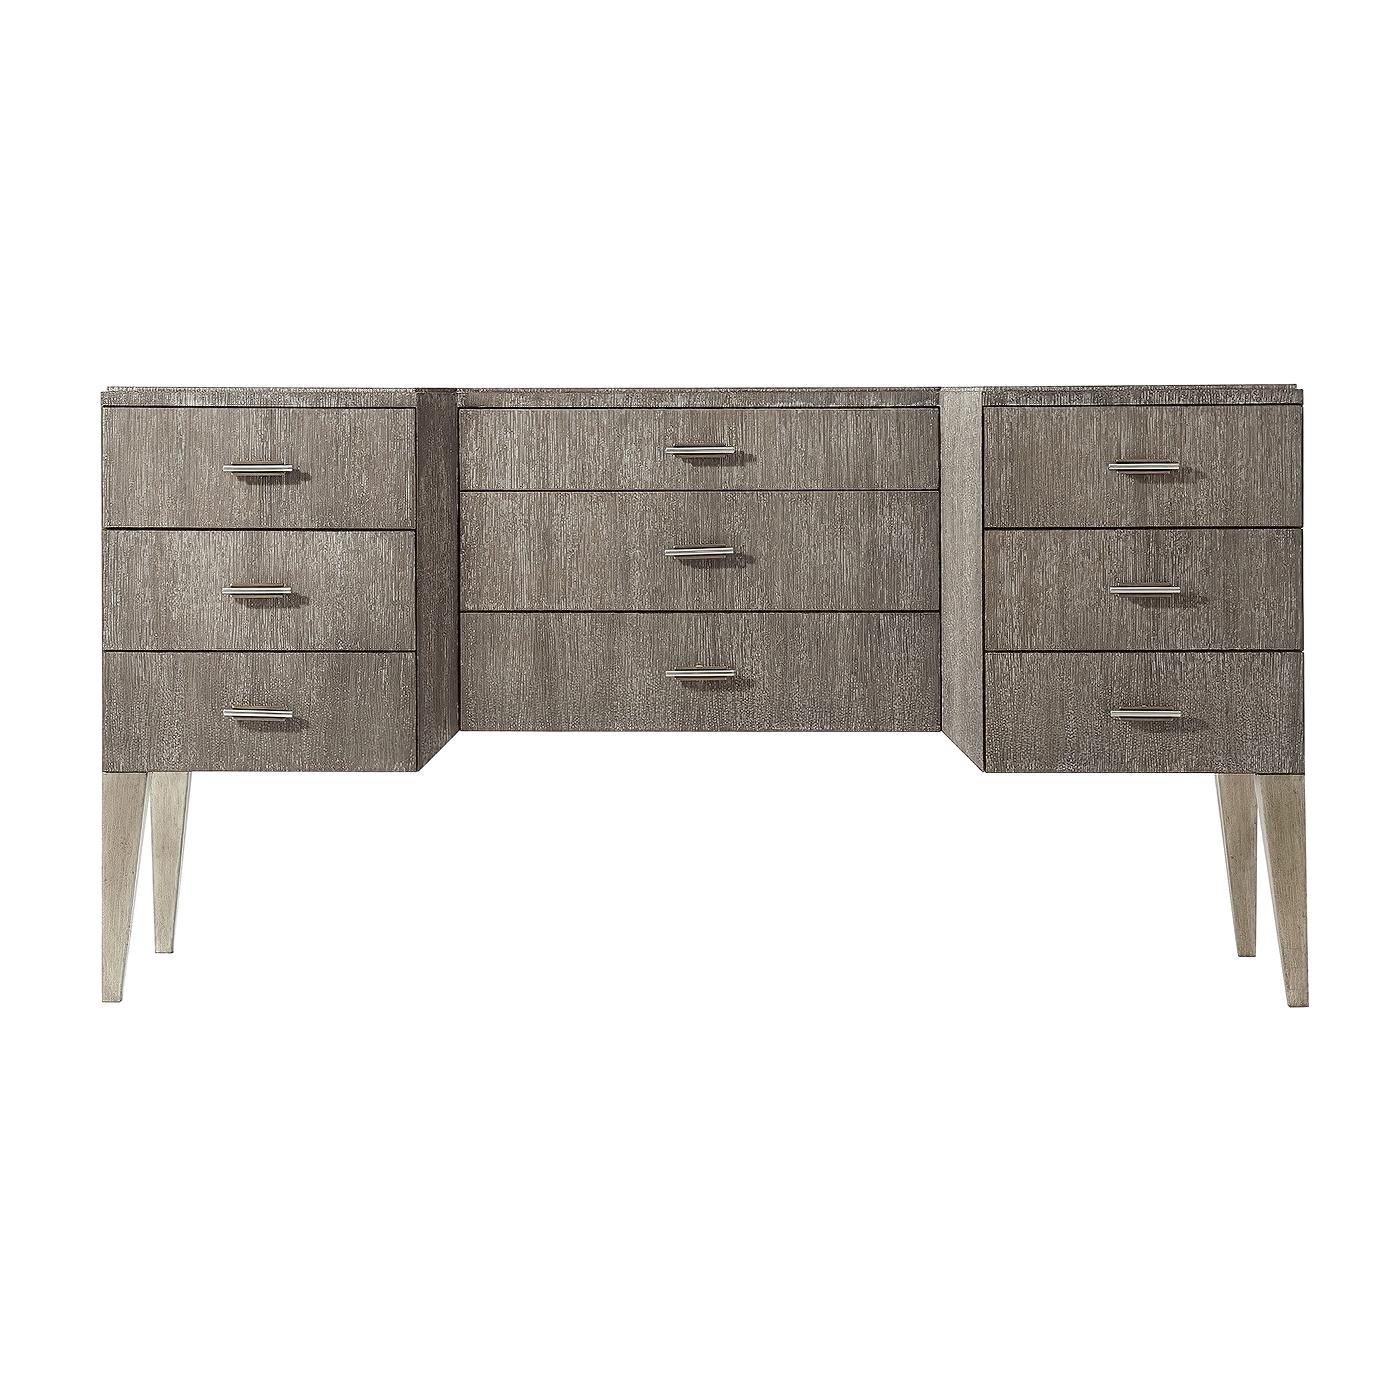 Modern cerused oak breakfront dresser with nine self closing drawers, brass and stainless steel handles and raised on brush pewter legs. With soft slow closing drawer runners.
Dimensions: 62